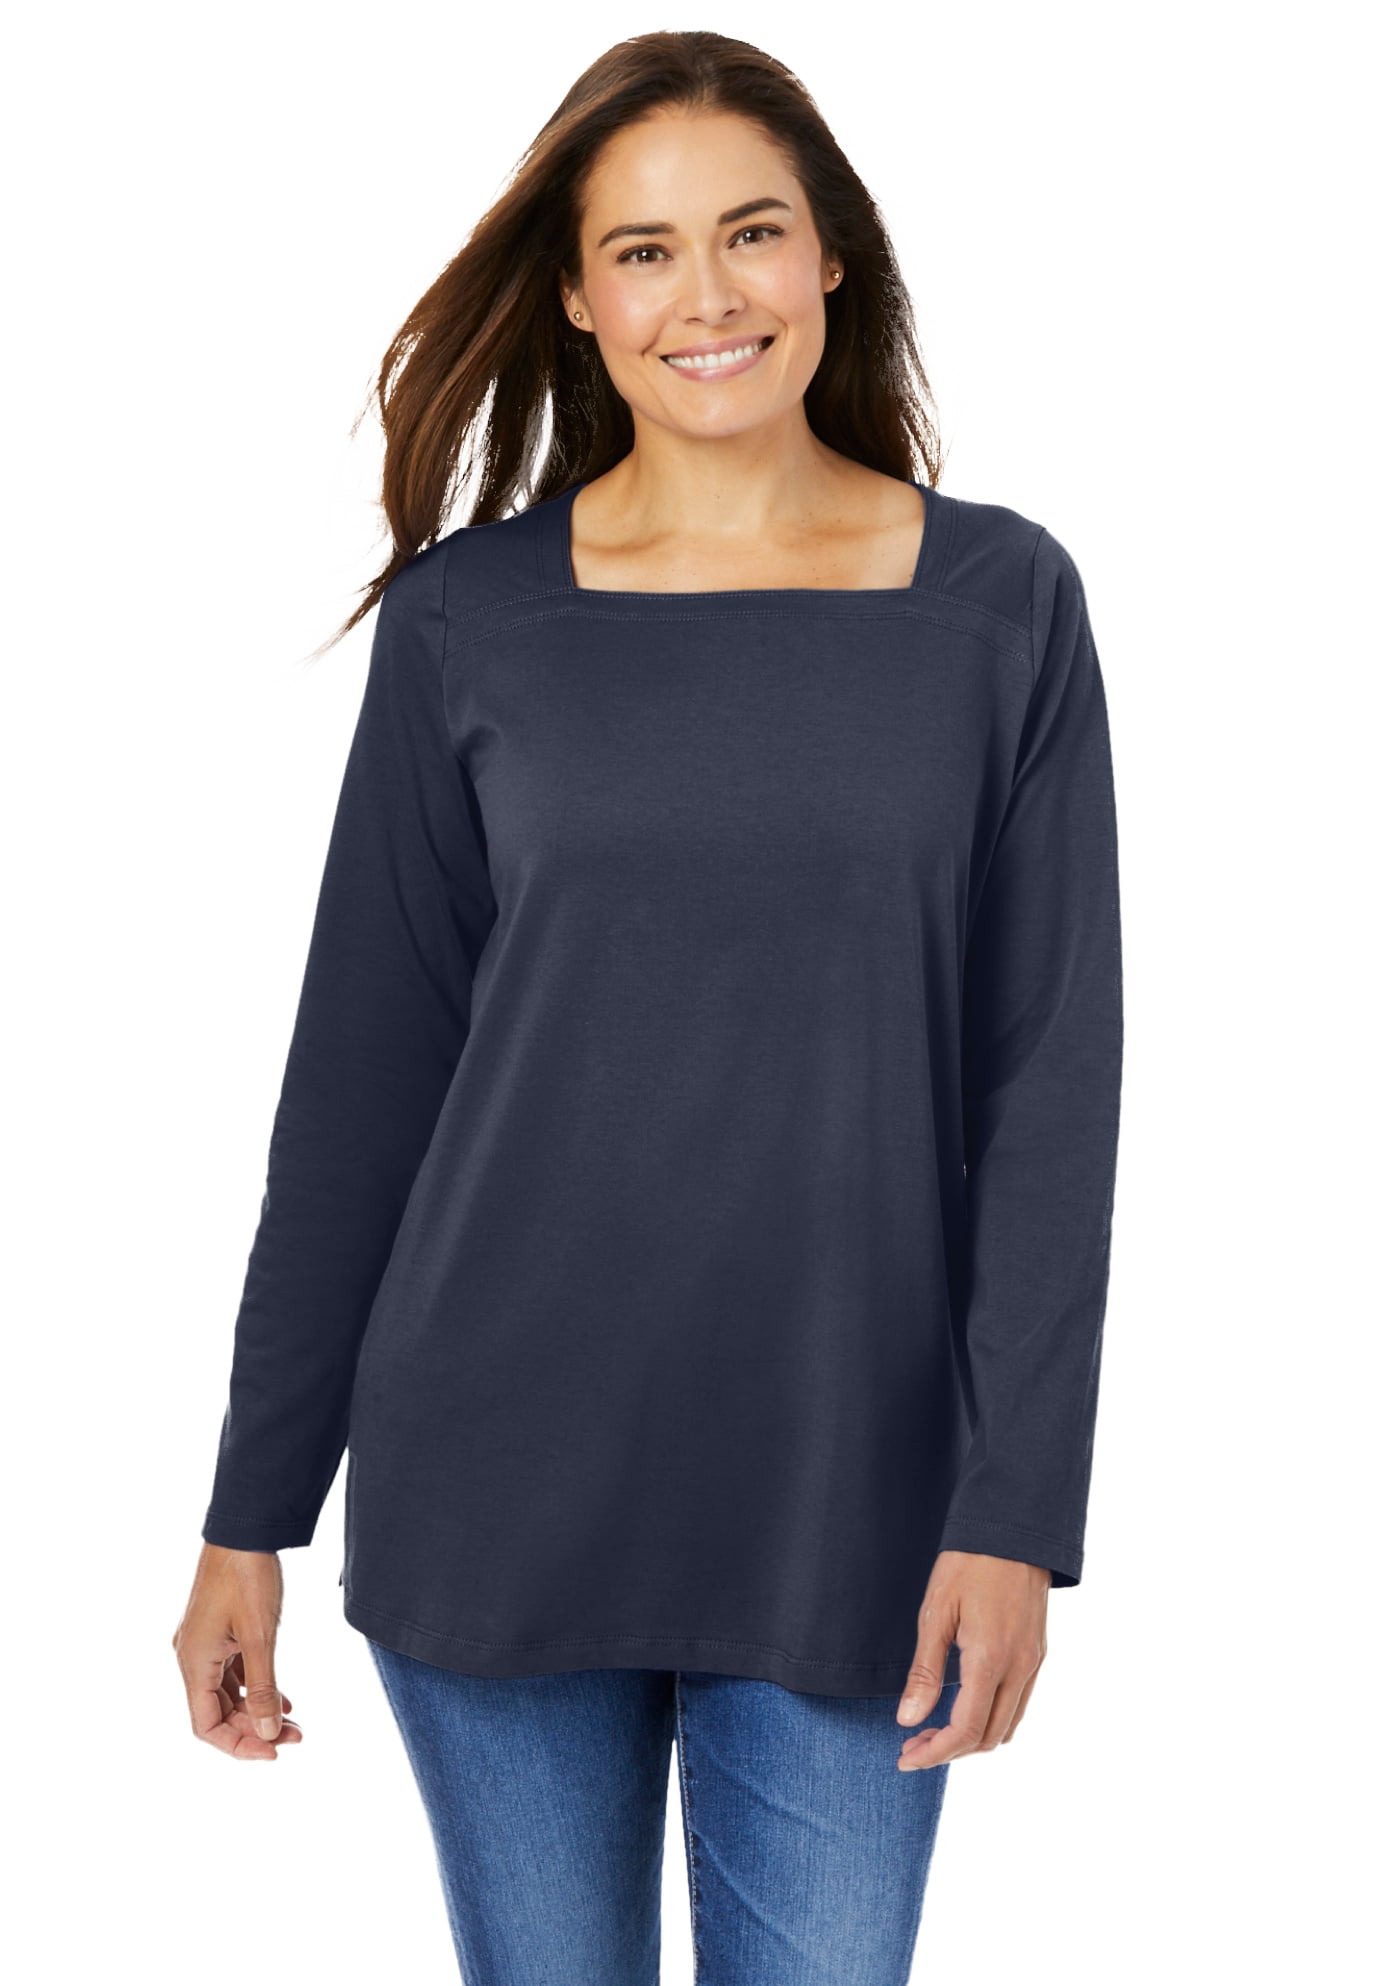 Woman Within - Woman Within Women's Plus Size Perfect Long-Sleeve ...